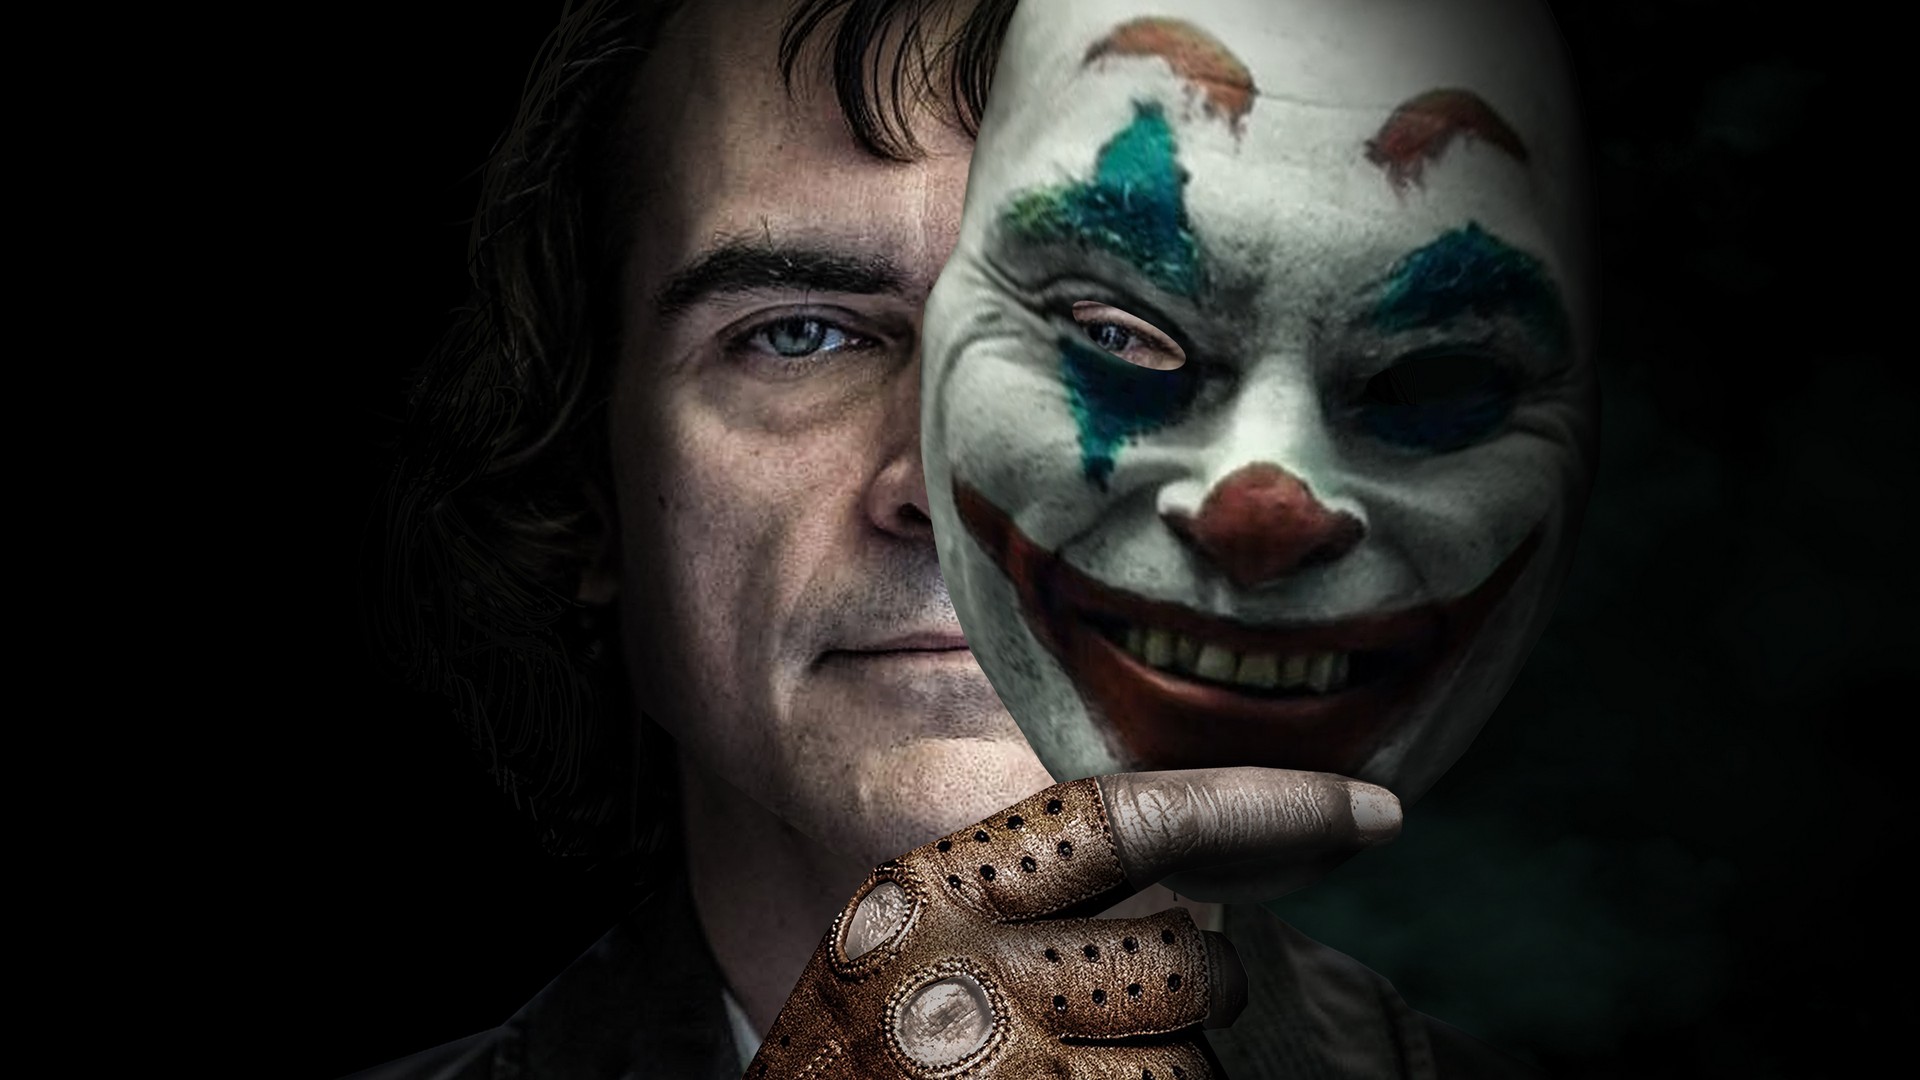 Joker 2019 Movie Wallpaper with high-resolution 1920x1080 pixel. You can use this poster wallpaper for your Desktop Computers, Mac Screensavers, Windows Backgrounds, iPhone Wallpapers, Tablet or Android Lock screen and another Mobile device